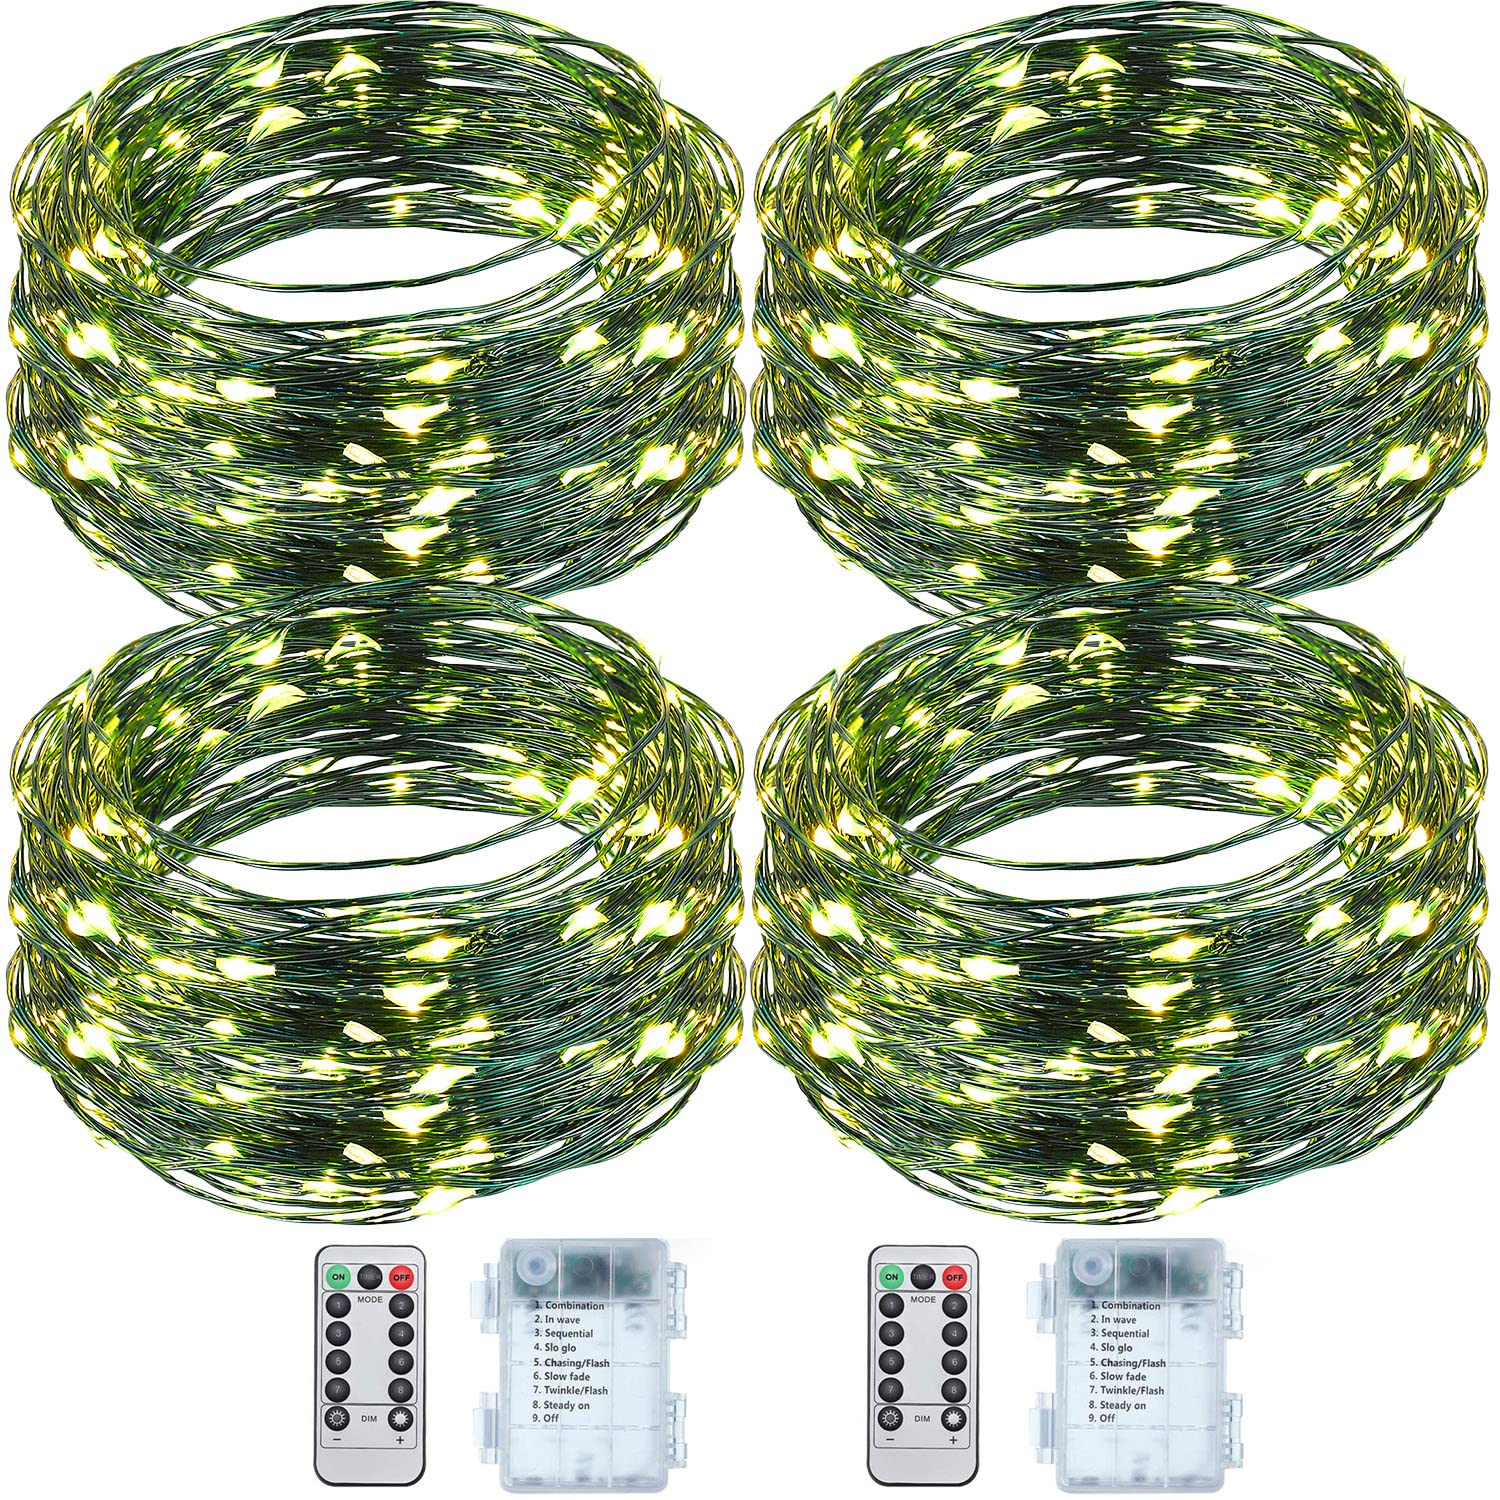 Remagr 4 Pcs Battery Operated String Lights Outdoor String Lights 33 ft/10 m 100 LED Warm White Wire Green Battery Operated Fairy Lights with 8 Modes for Christmas Garden Patio Tree Decorations